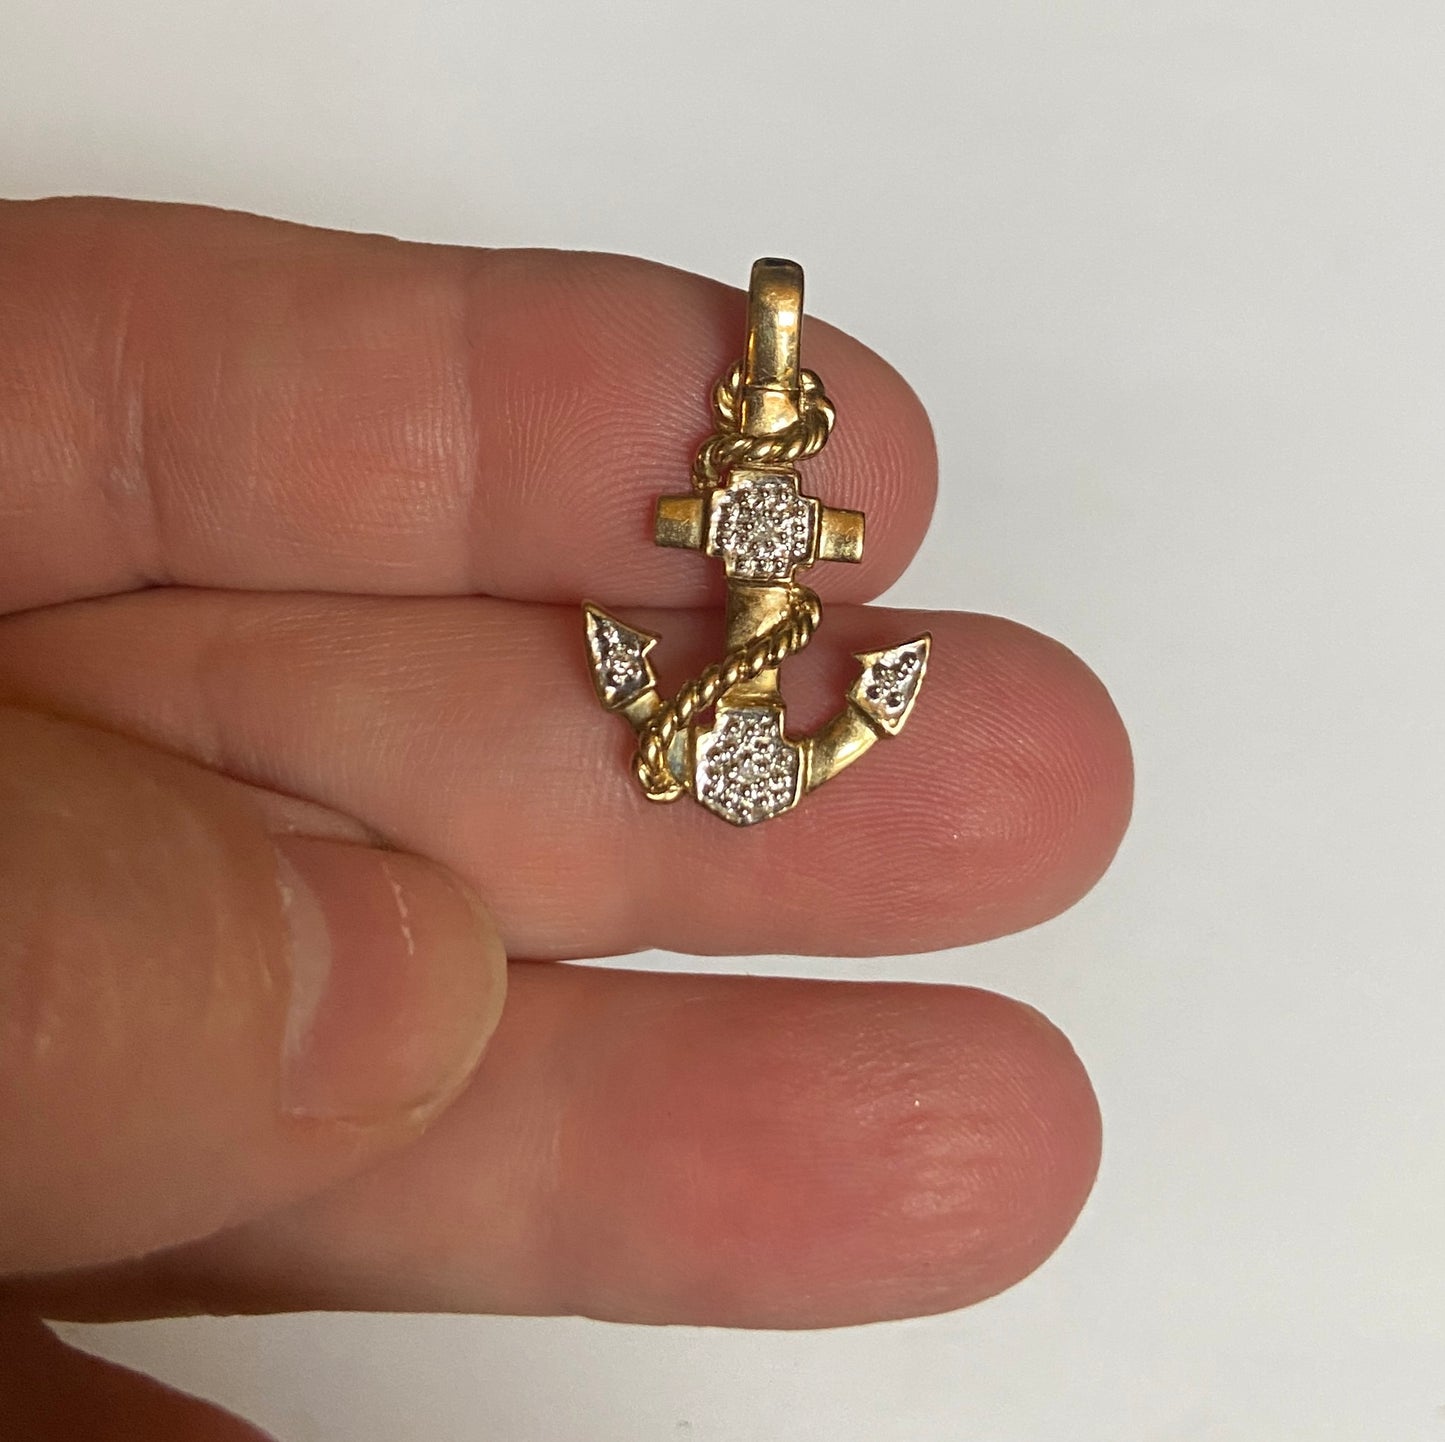 9ct pre owned Anchor pendant / charm with diamonds